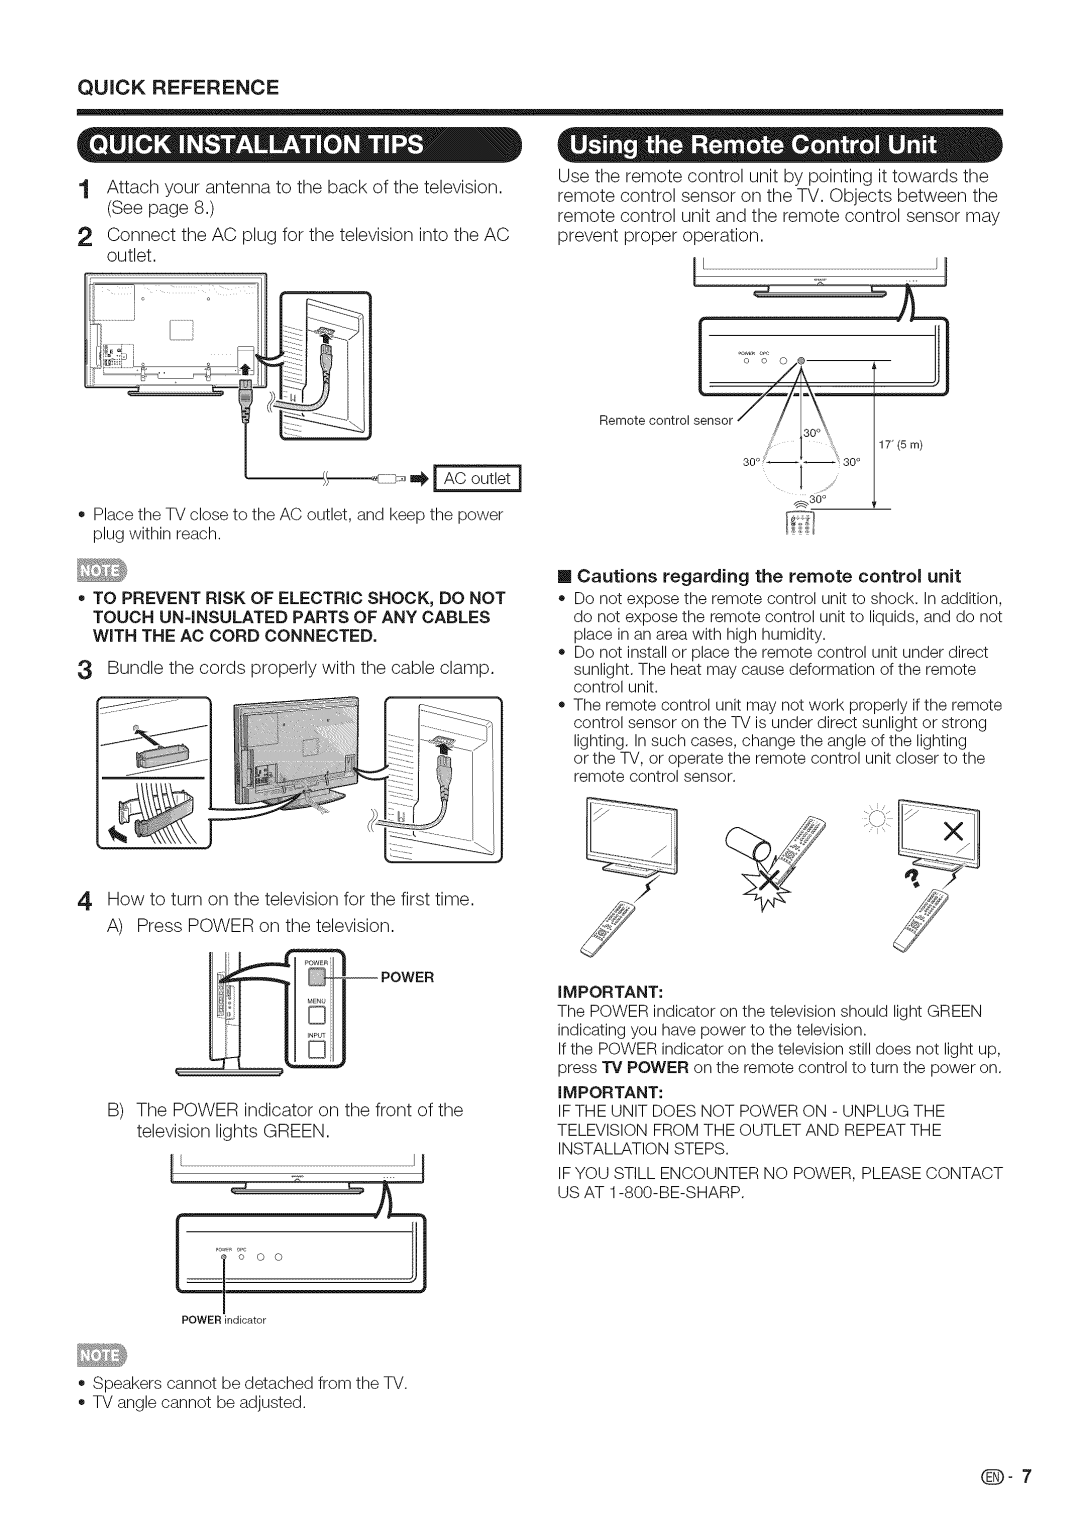 Sharp LC-46LE700, LC-52LE700 Quick Reference, WiTH THE AC CORD CONNECTED, II Cautions regarding the remote control unit 